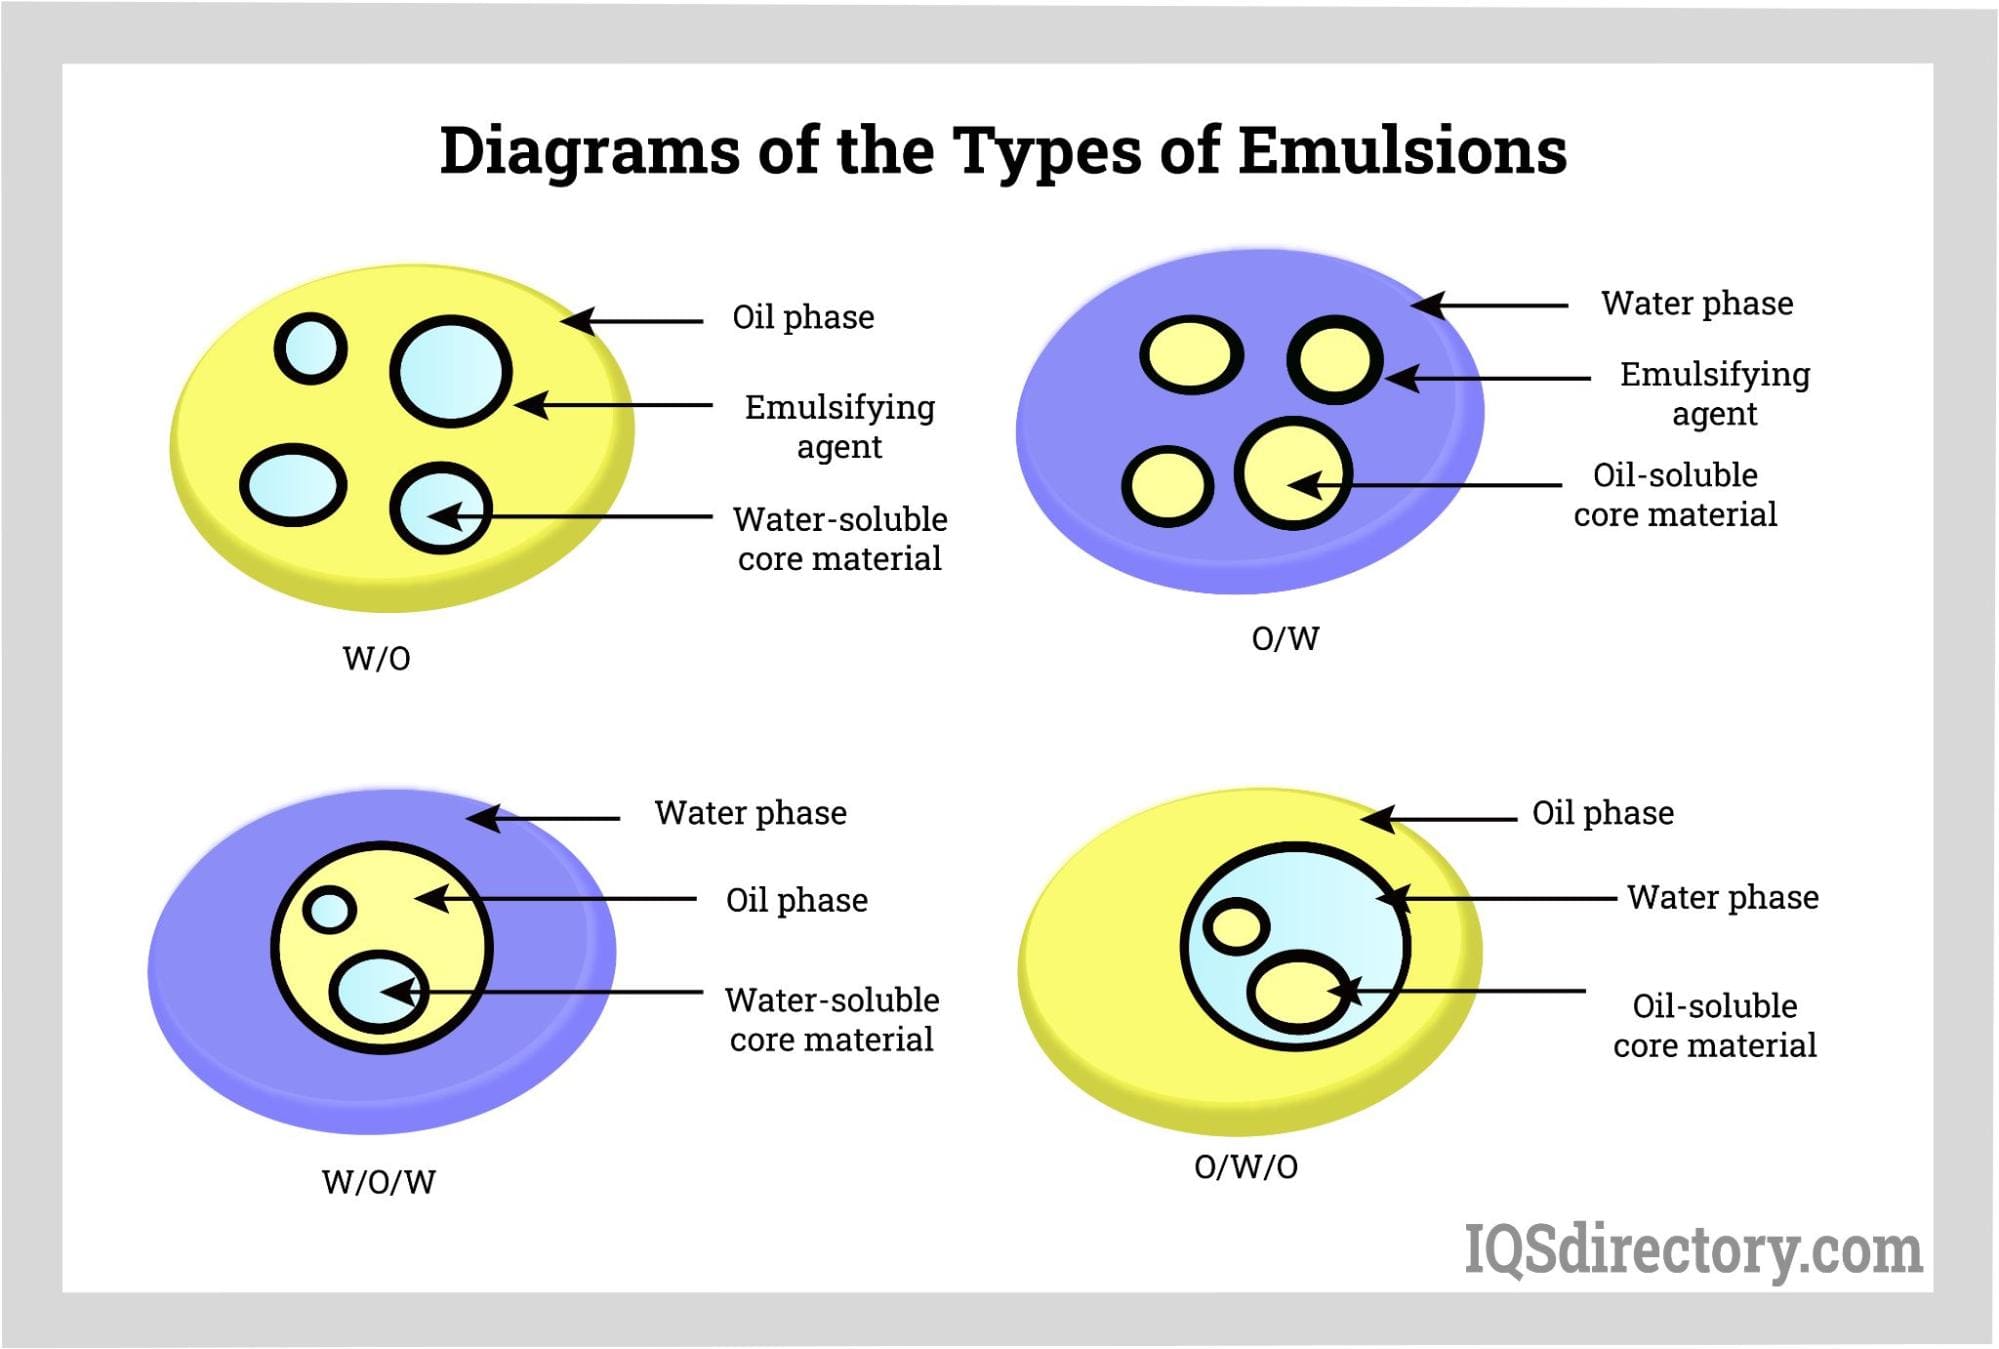 https://www.iqsdirectory.com/articles/mixer/emulsifiers/diagrams-of-the-types-of-emulsions.jpg